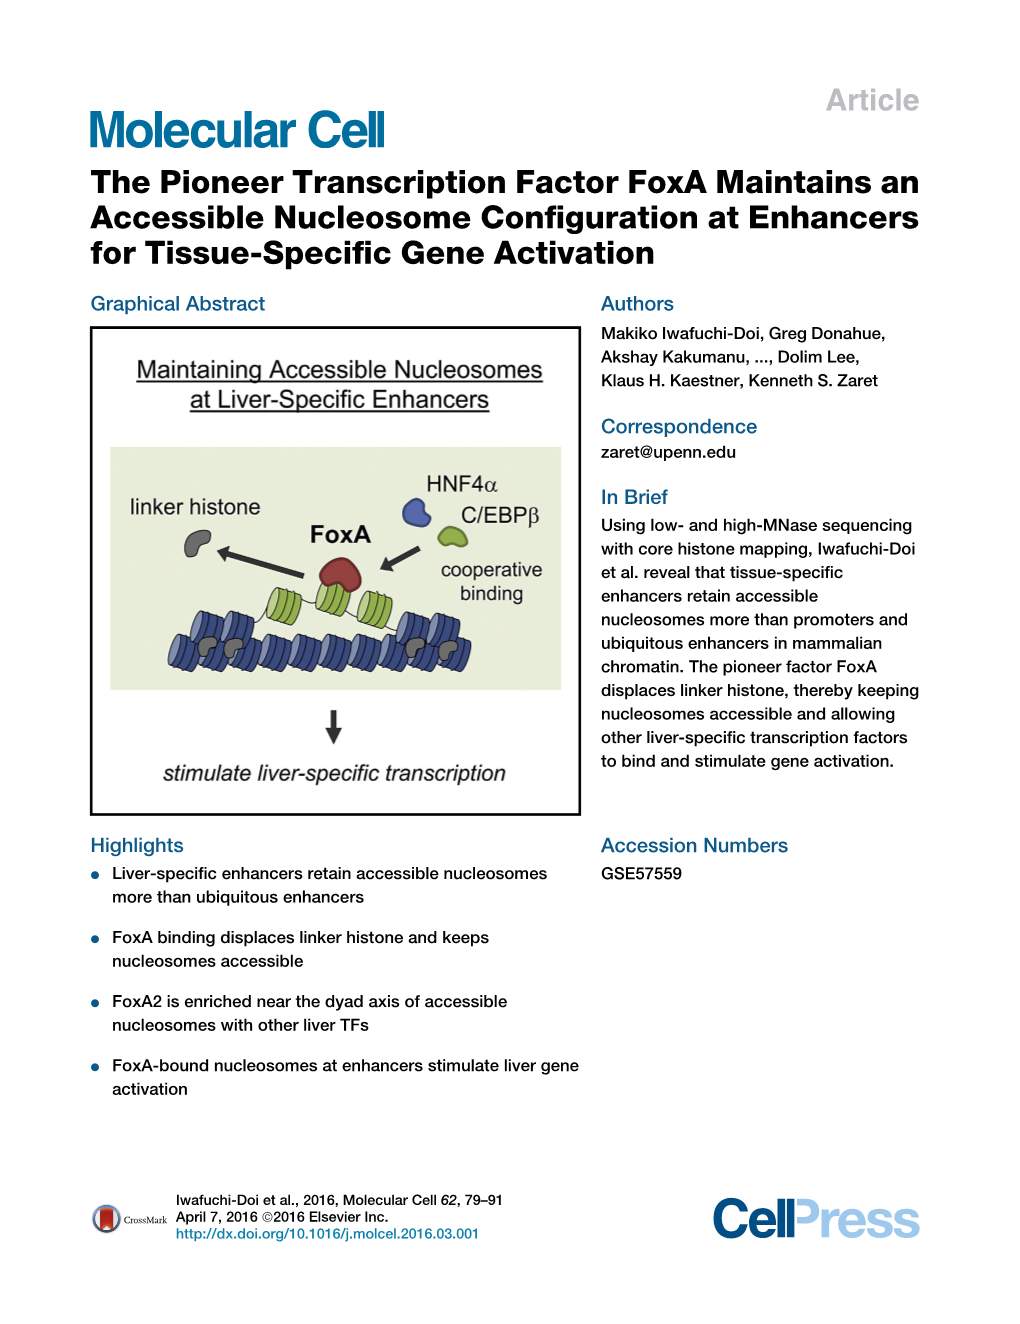 The Pioneer Transcription Factor Foxa Maintains an Accessible Nucleosome Conﬁguration at Enhancers for Tissue-Speciﬁc Gene Activation